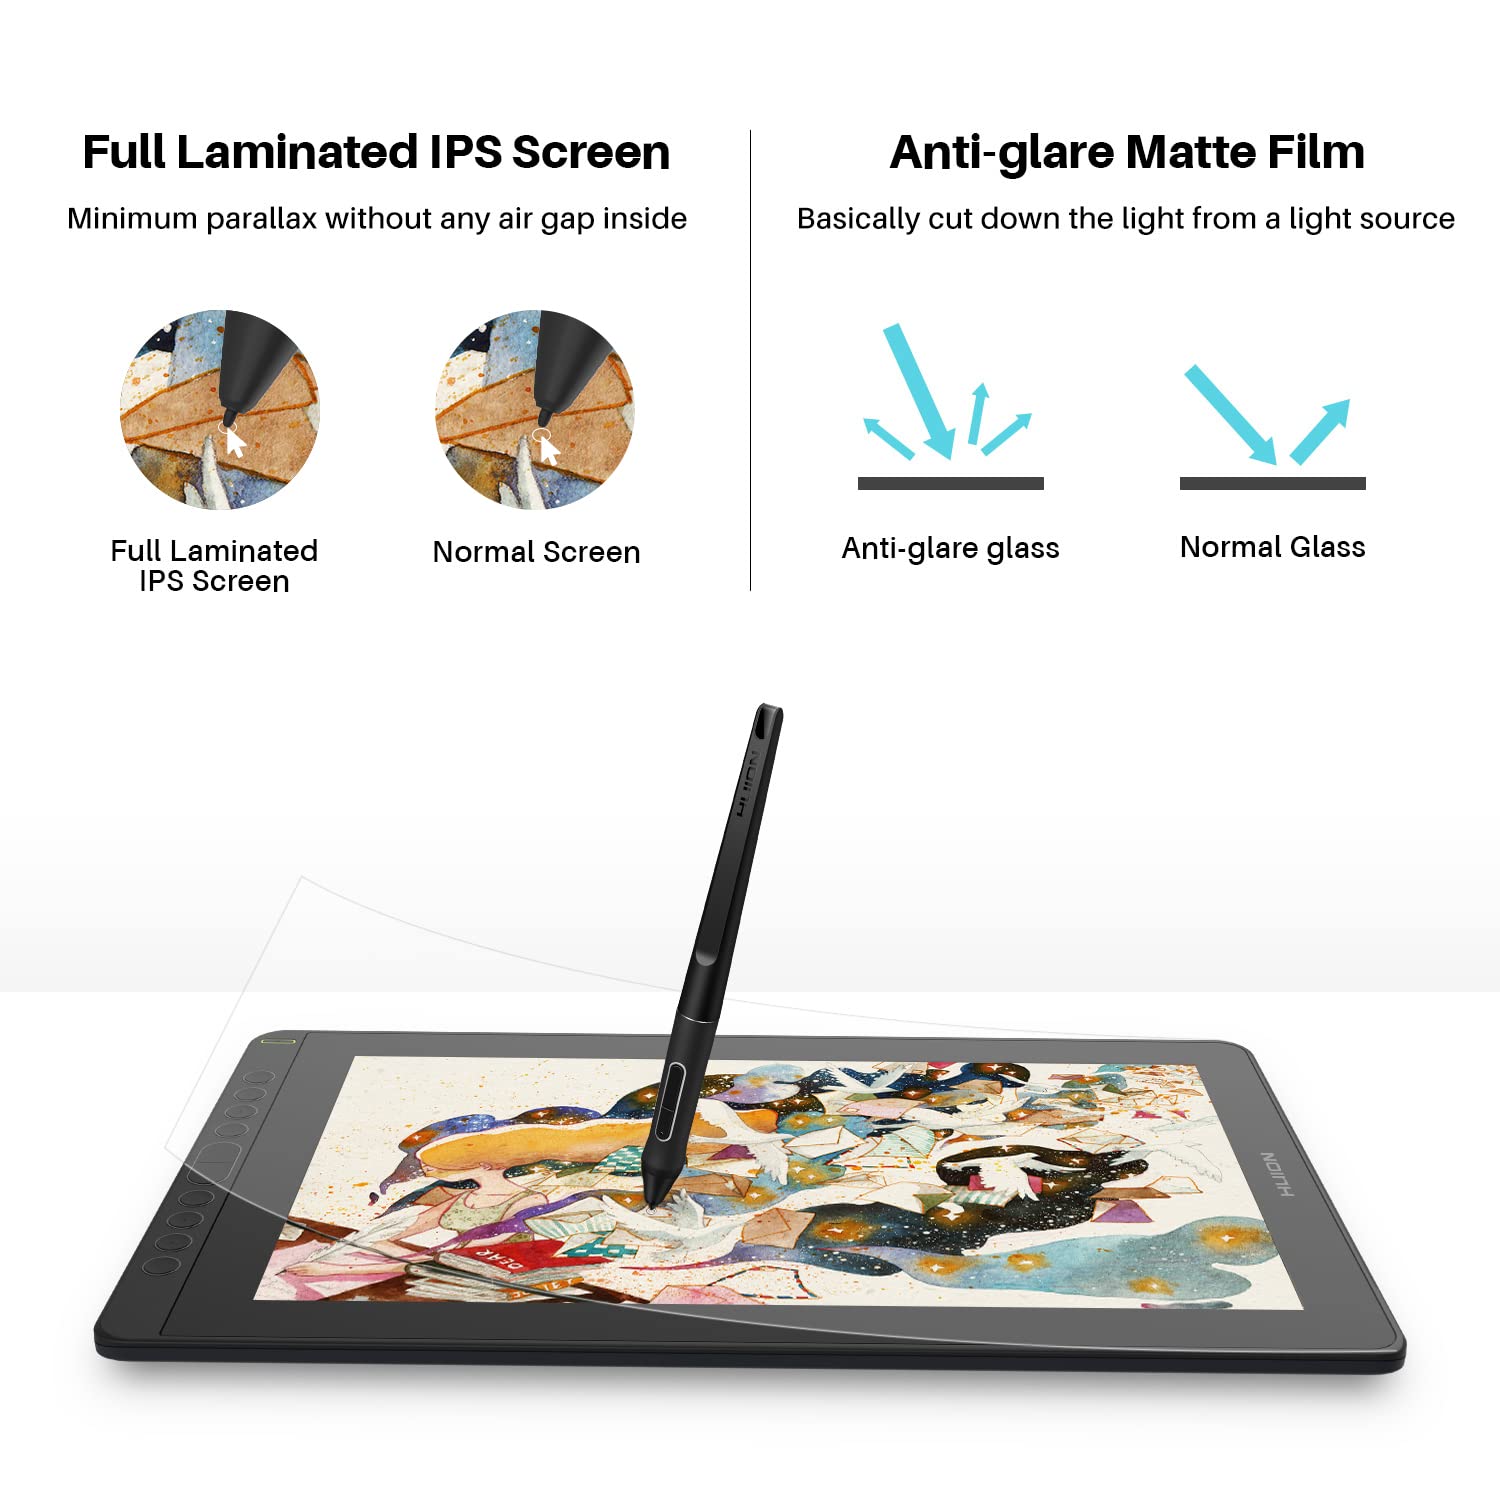 2021 HUION KAMVAS 16 Graphics Drawing Tablet with Full-Laminated Screen Anti-Glare 10 Express Keys Android Support Battery-Free Stylus 8192 Pen Pressure Tilt Adjustable Stand - 15.6 Inch Pen Display